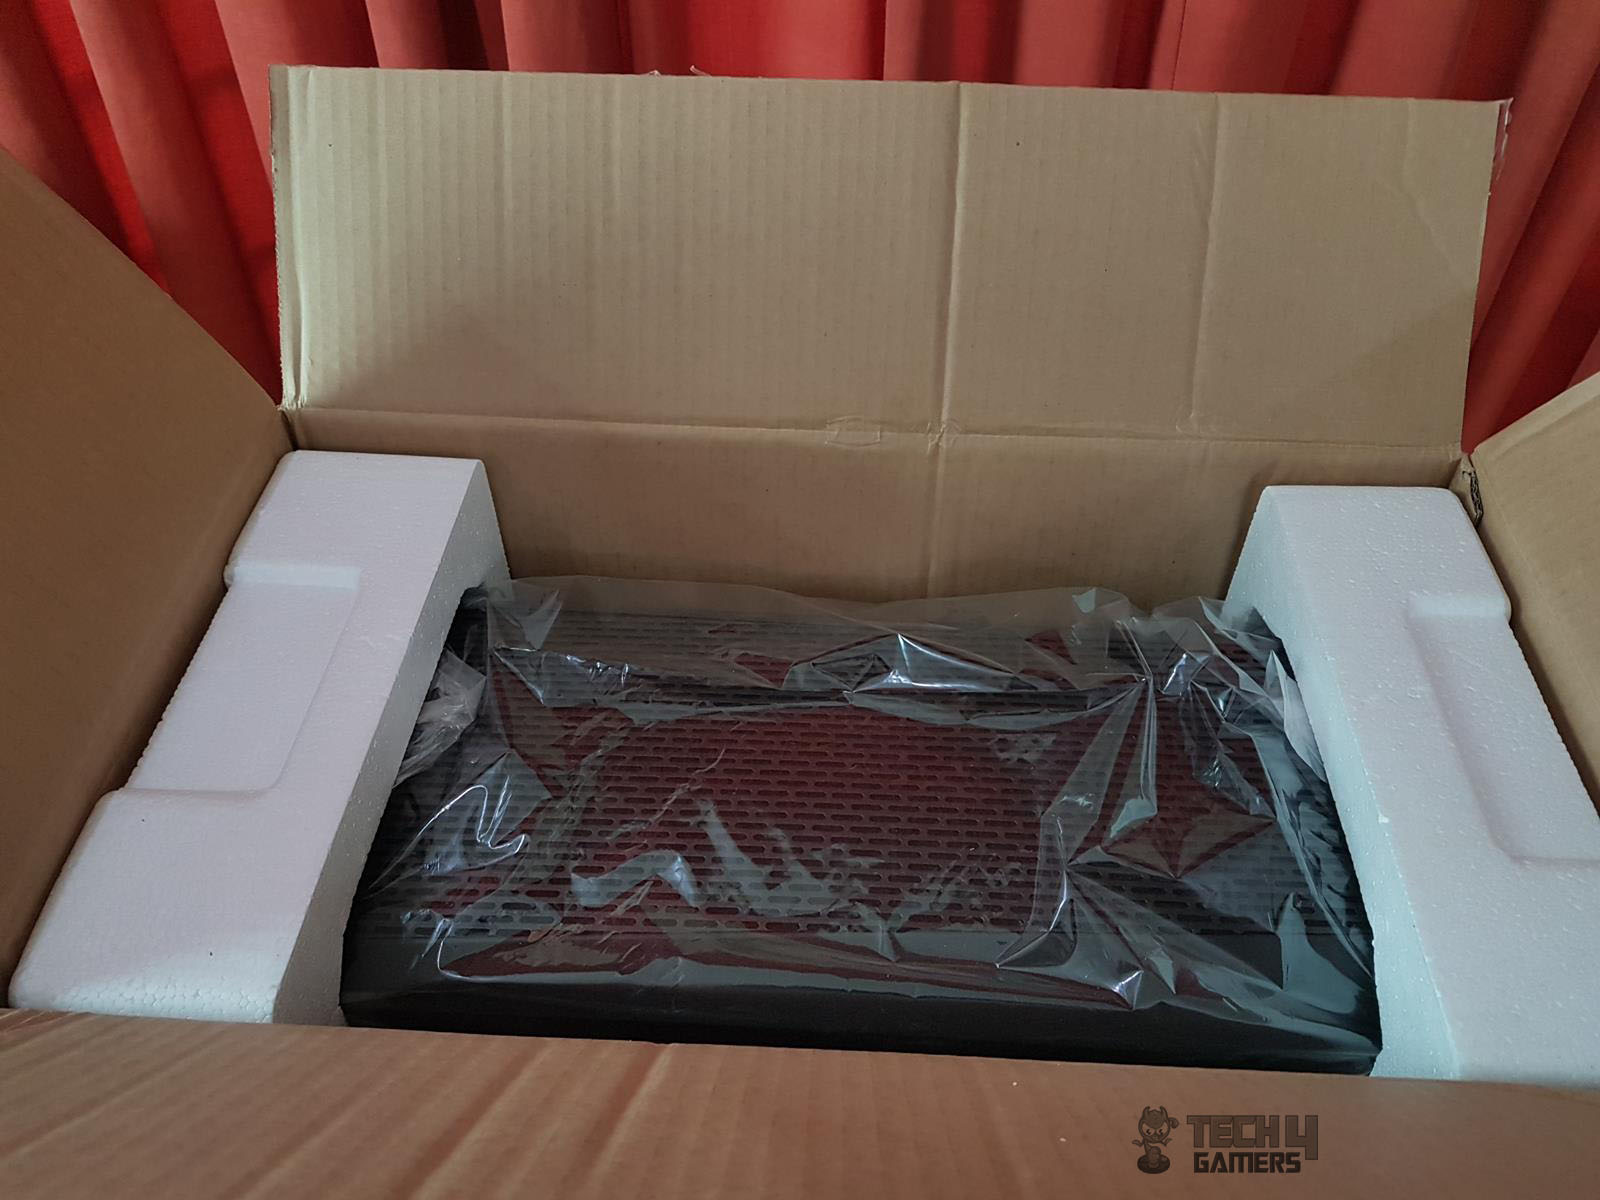 Unboxing the chassis